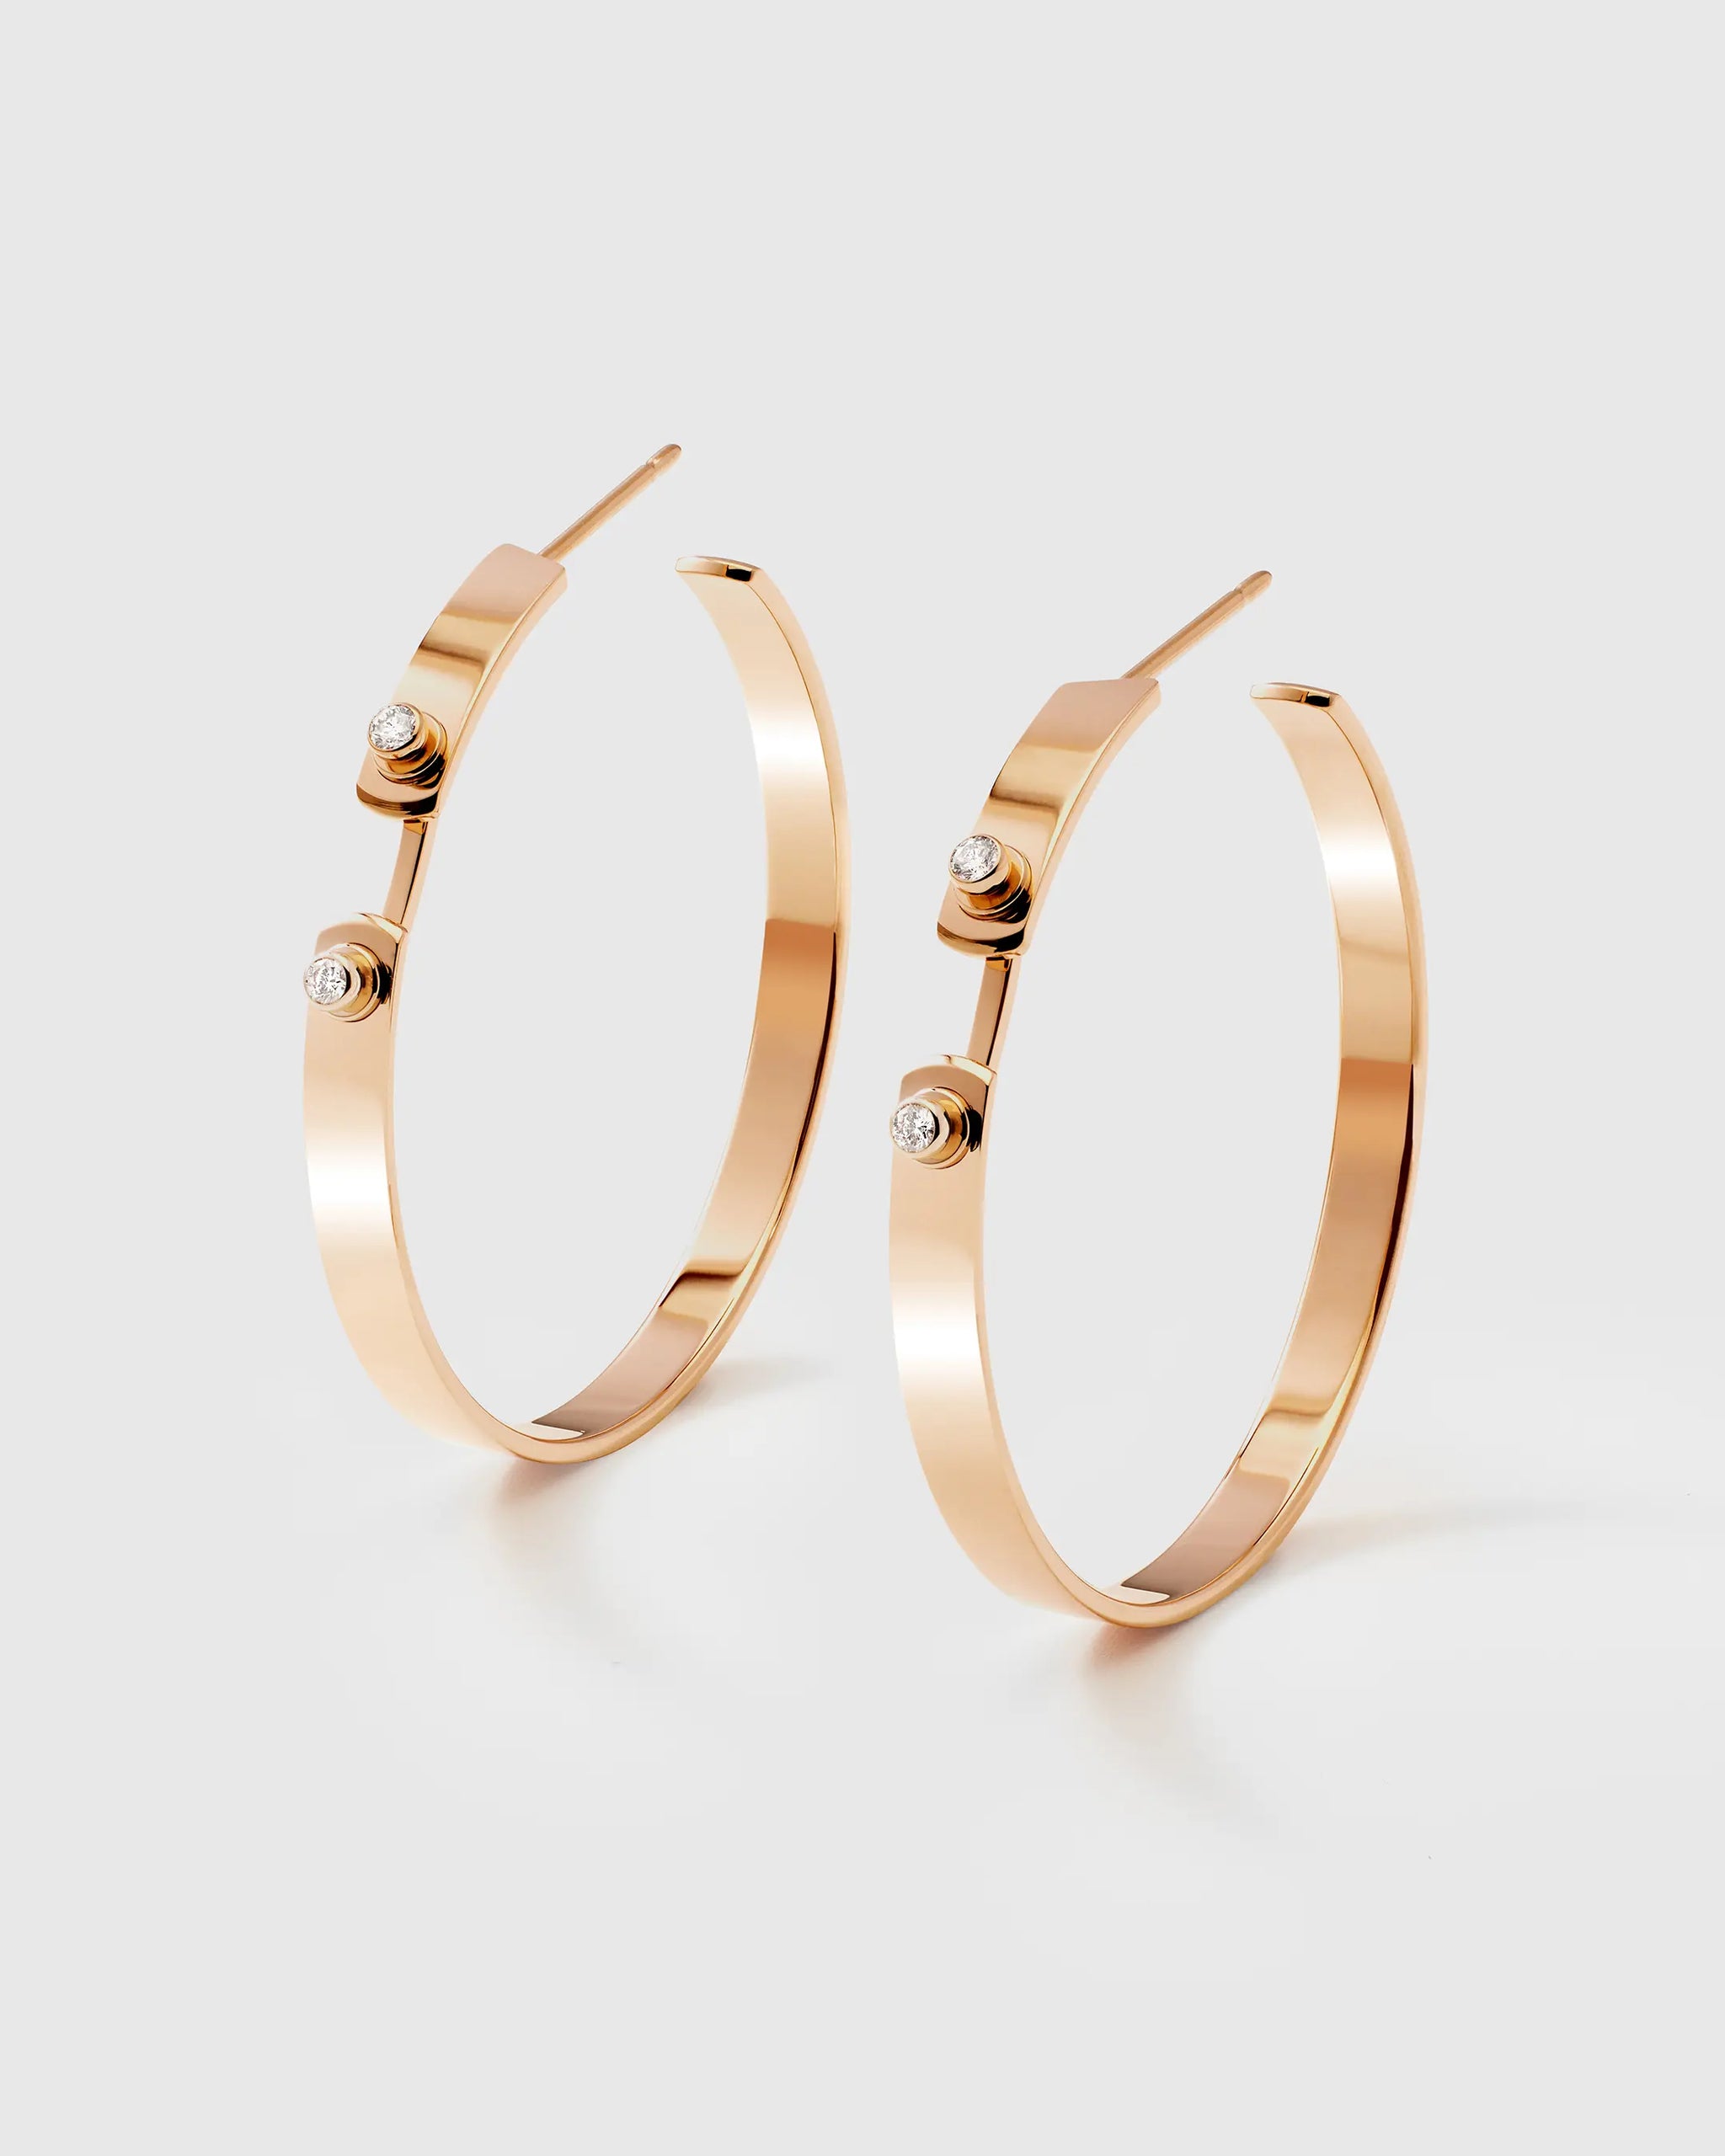 Monday Morning Mood Hoops in Rose Gold - 1 - Nouvel Heritage